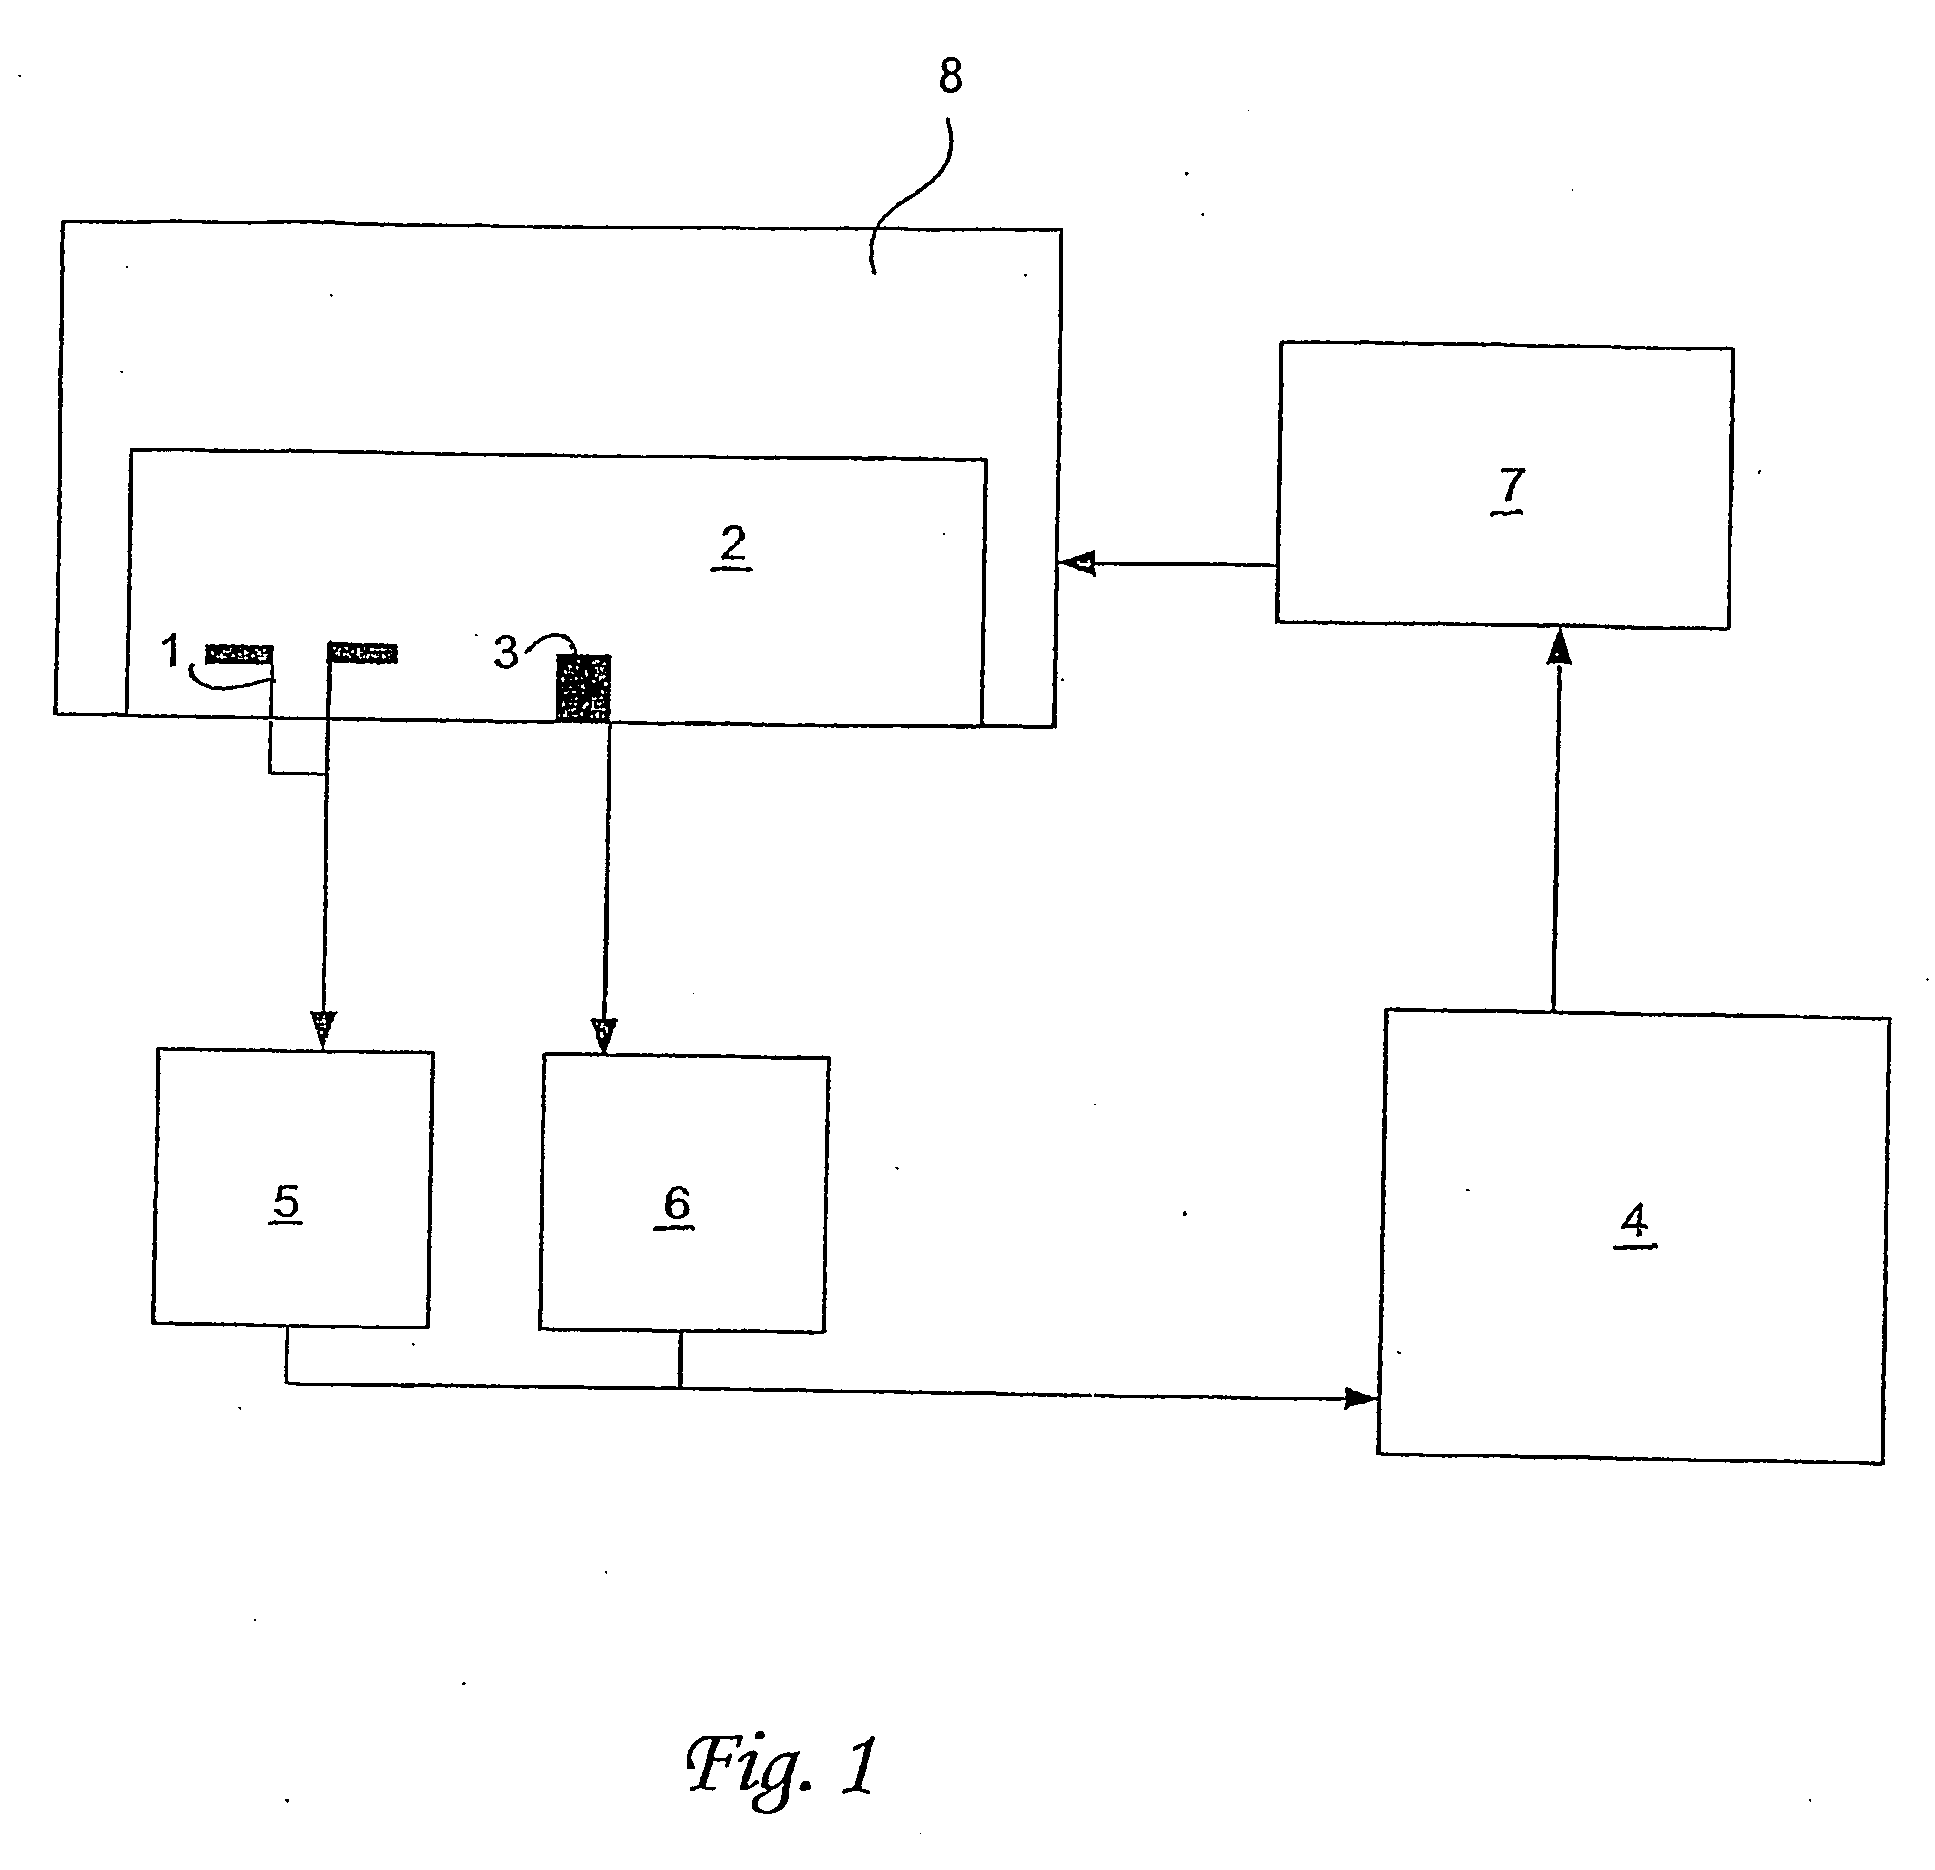 Method for the determination of the stresses occurring in wood when drying